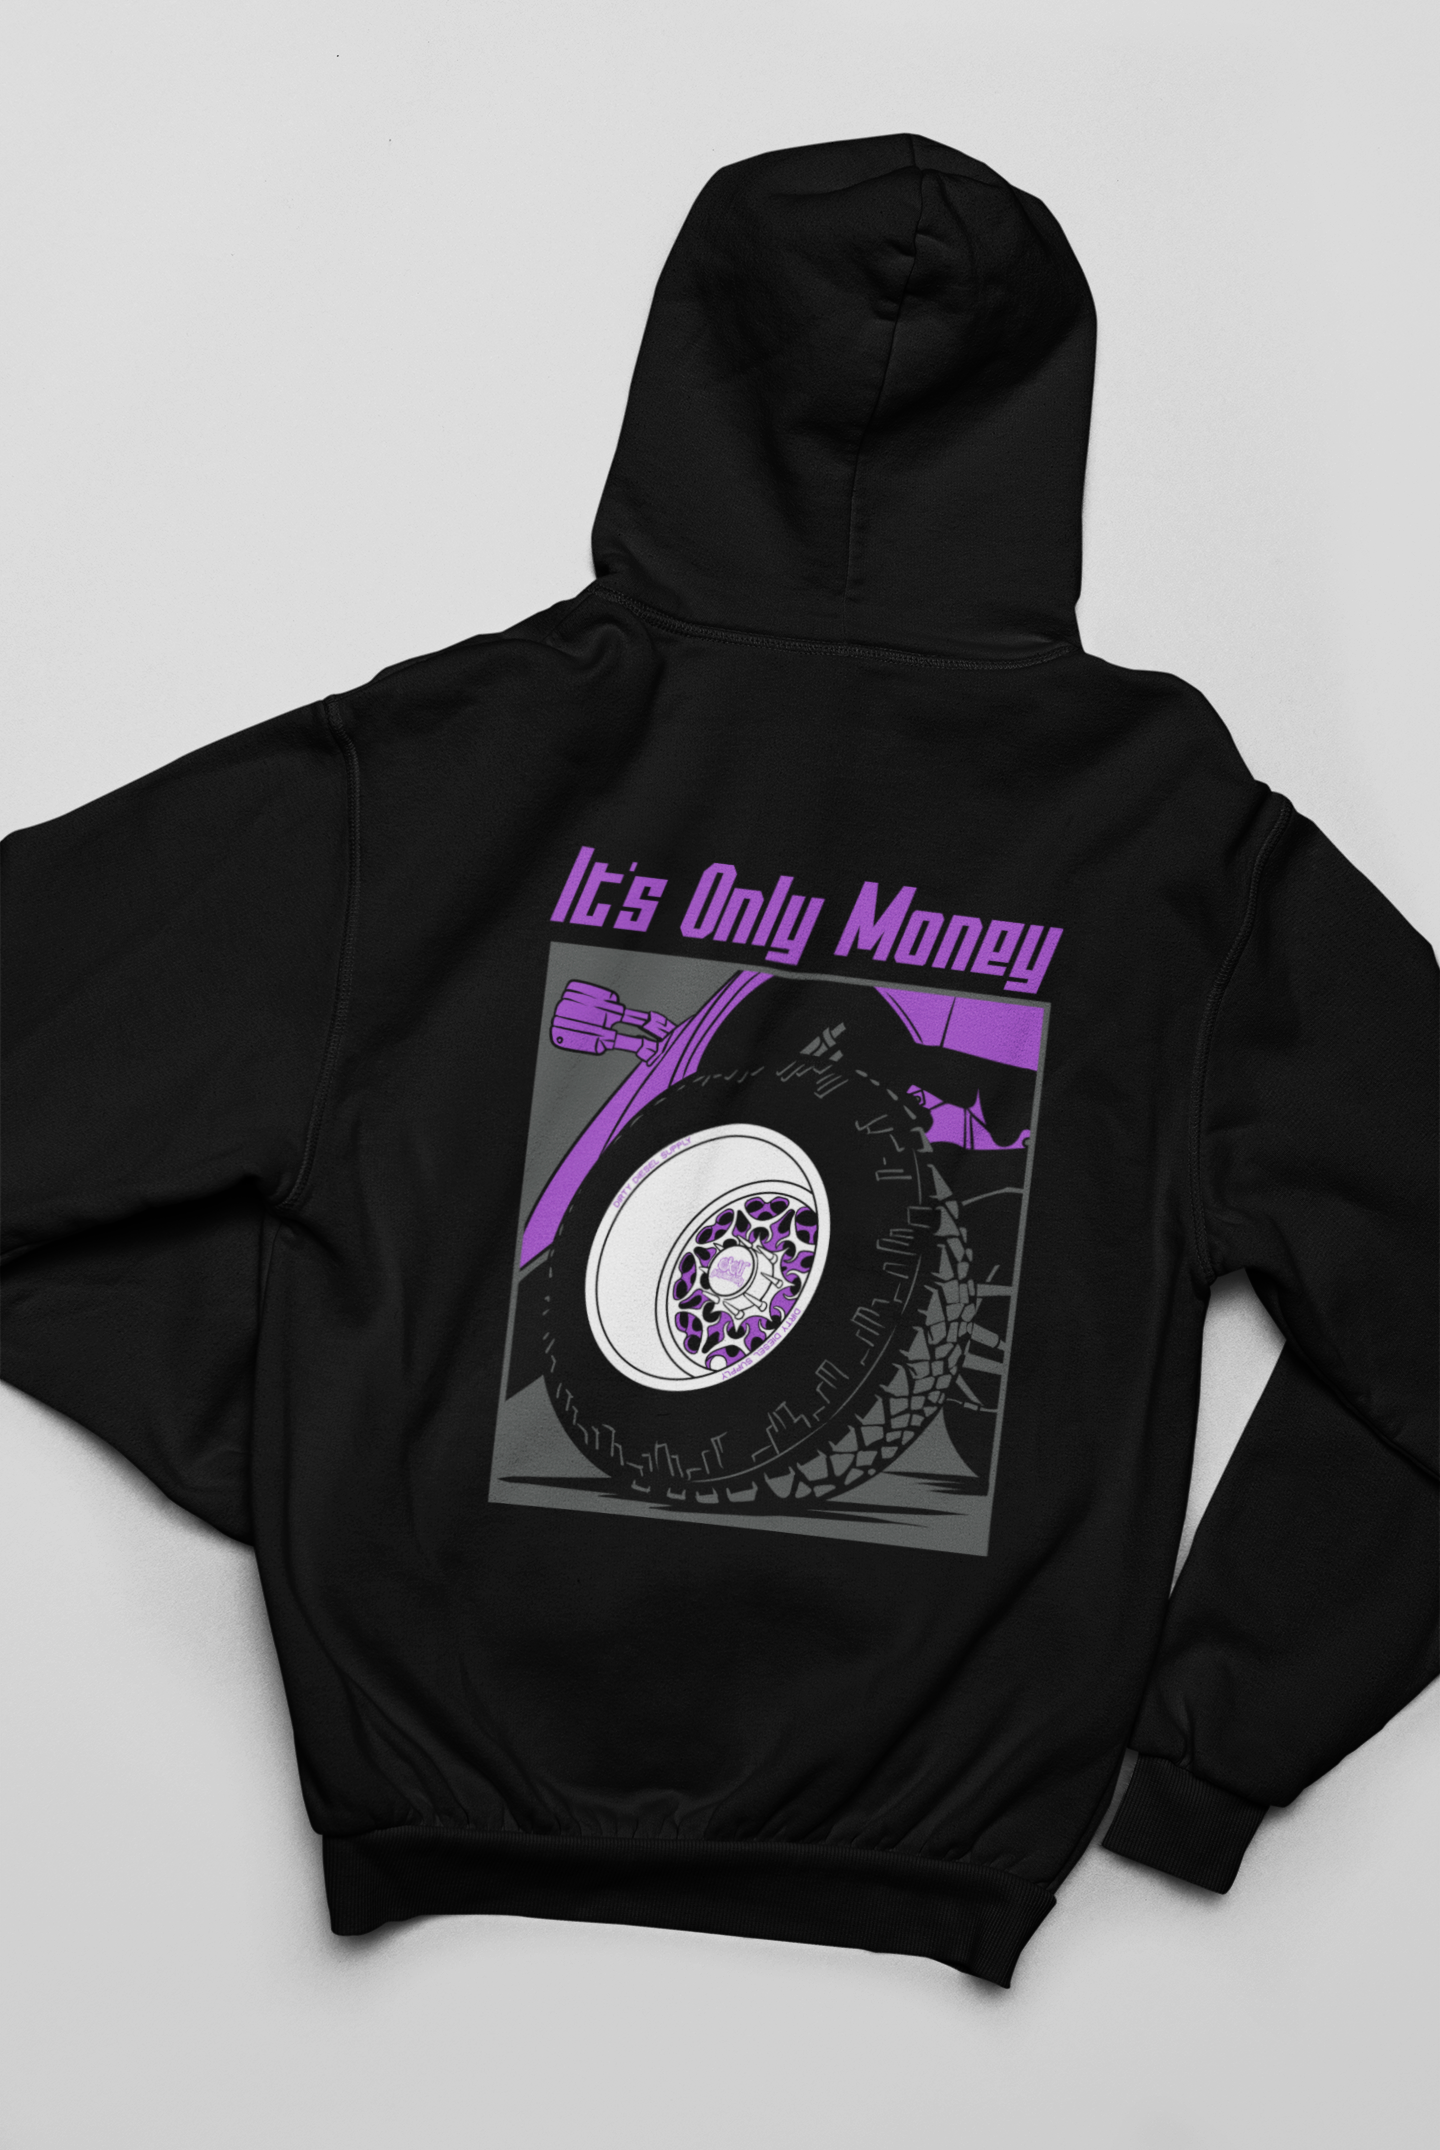 Only Money Hoodie